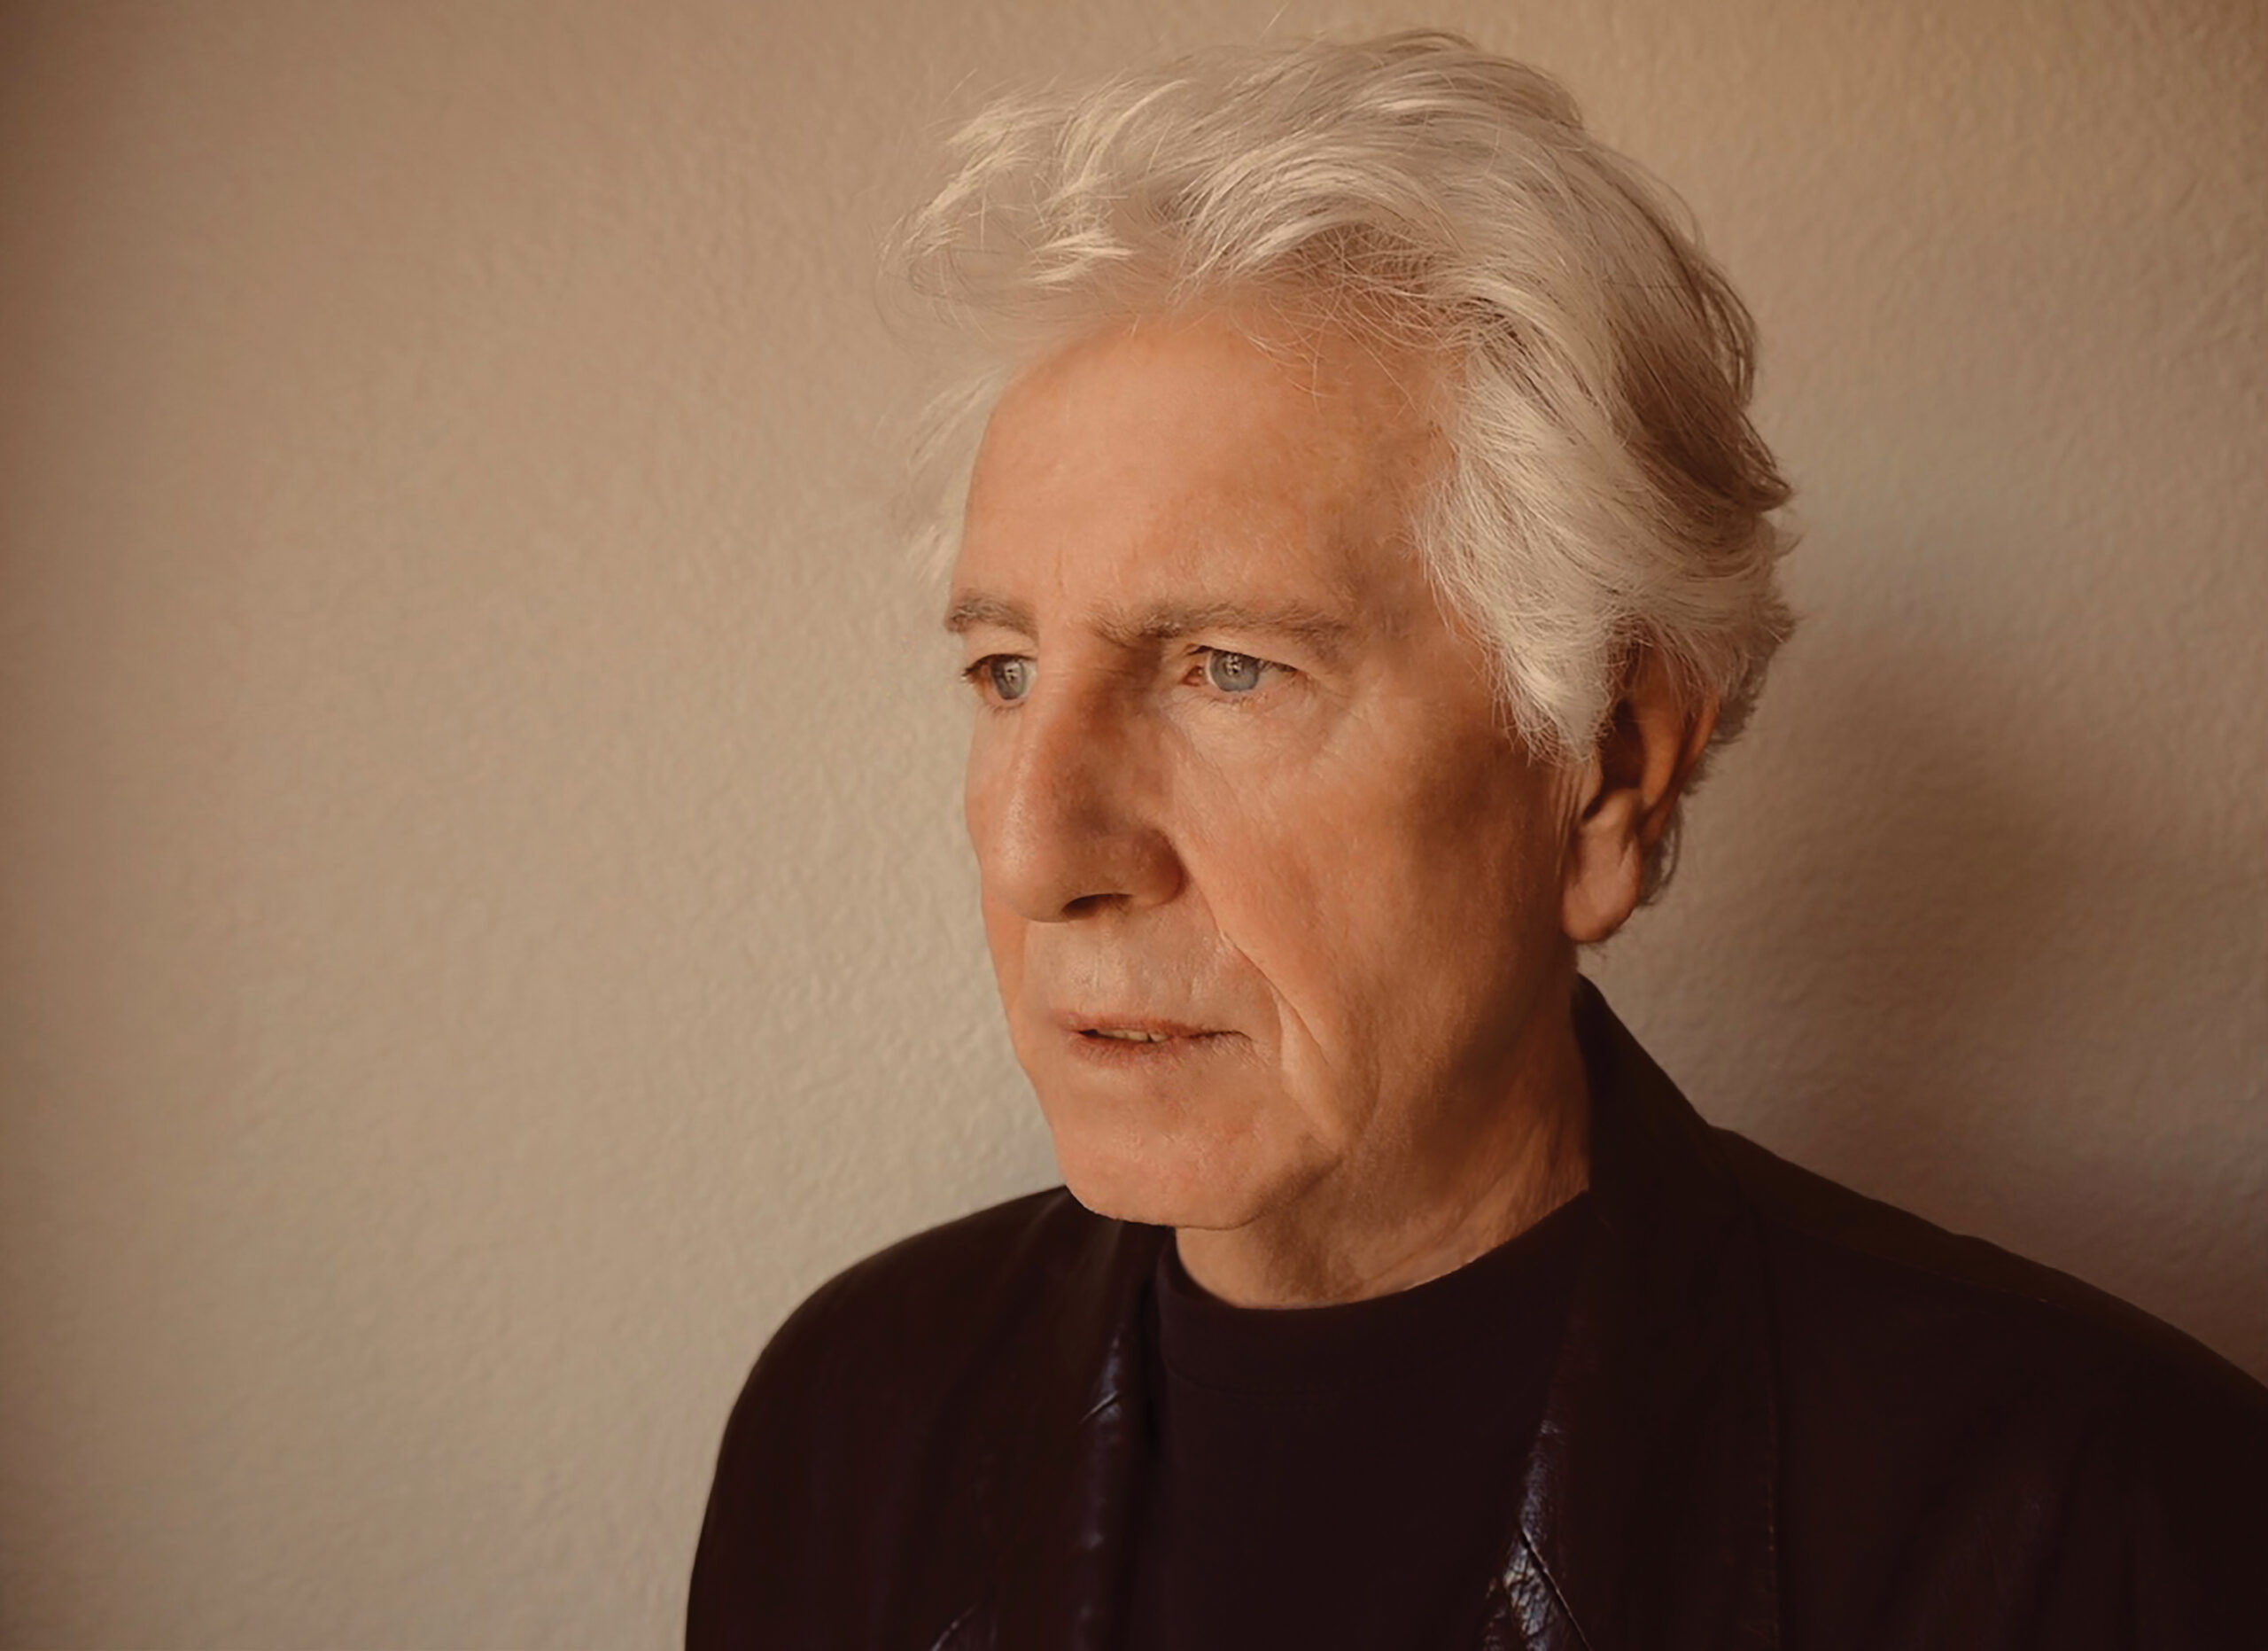 Graham Nash and India.Arie Pull Music From Spotify